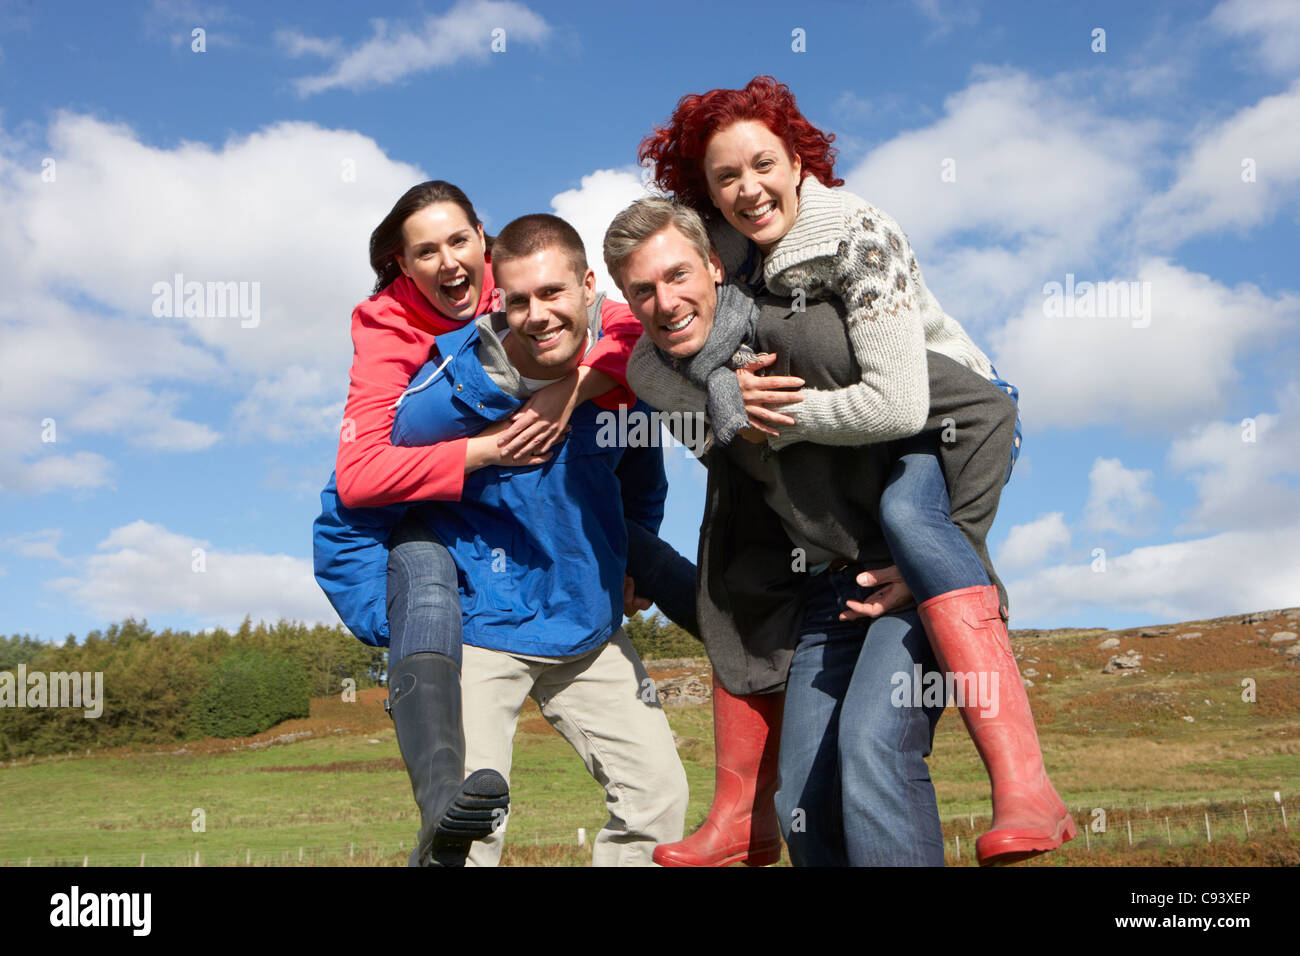 Adult group in countryside Stock Photo